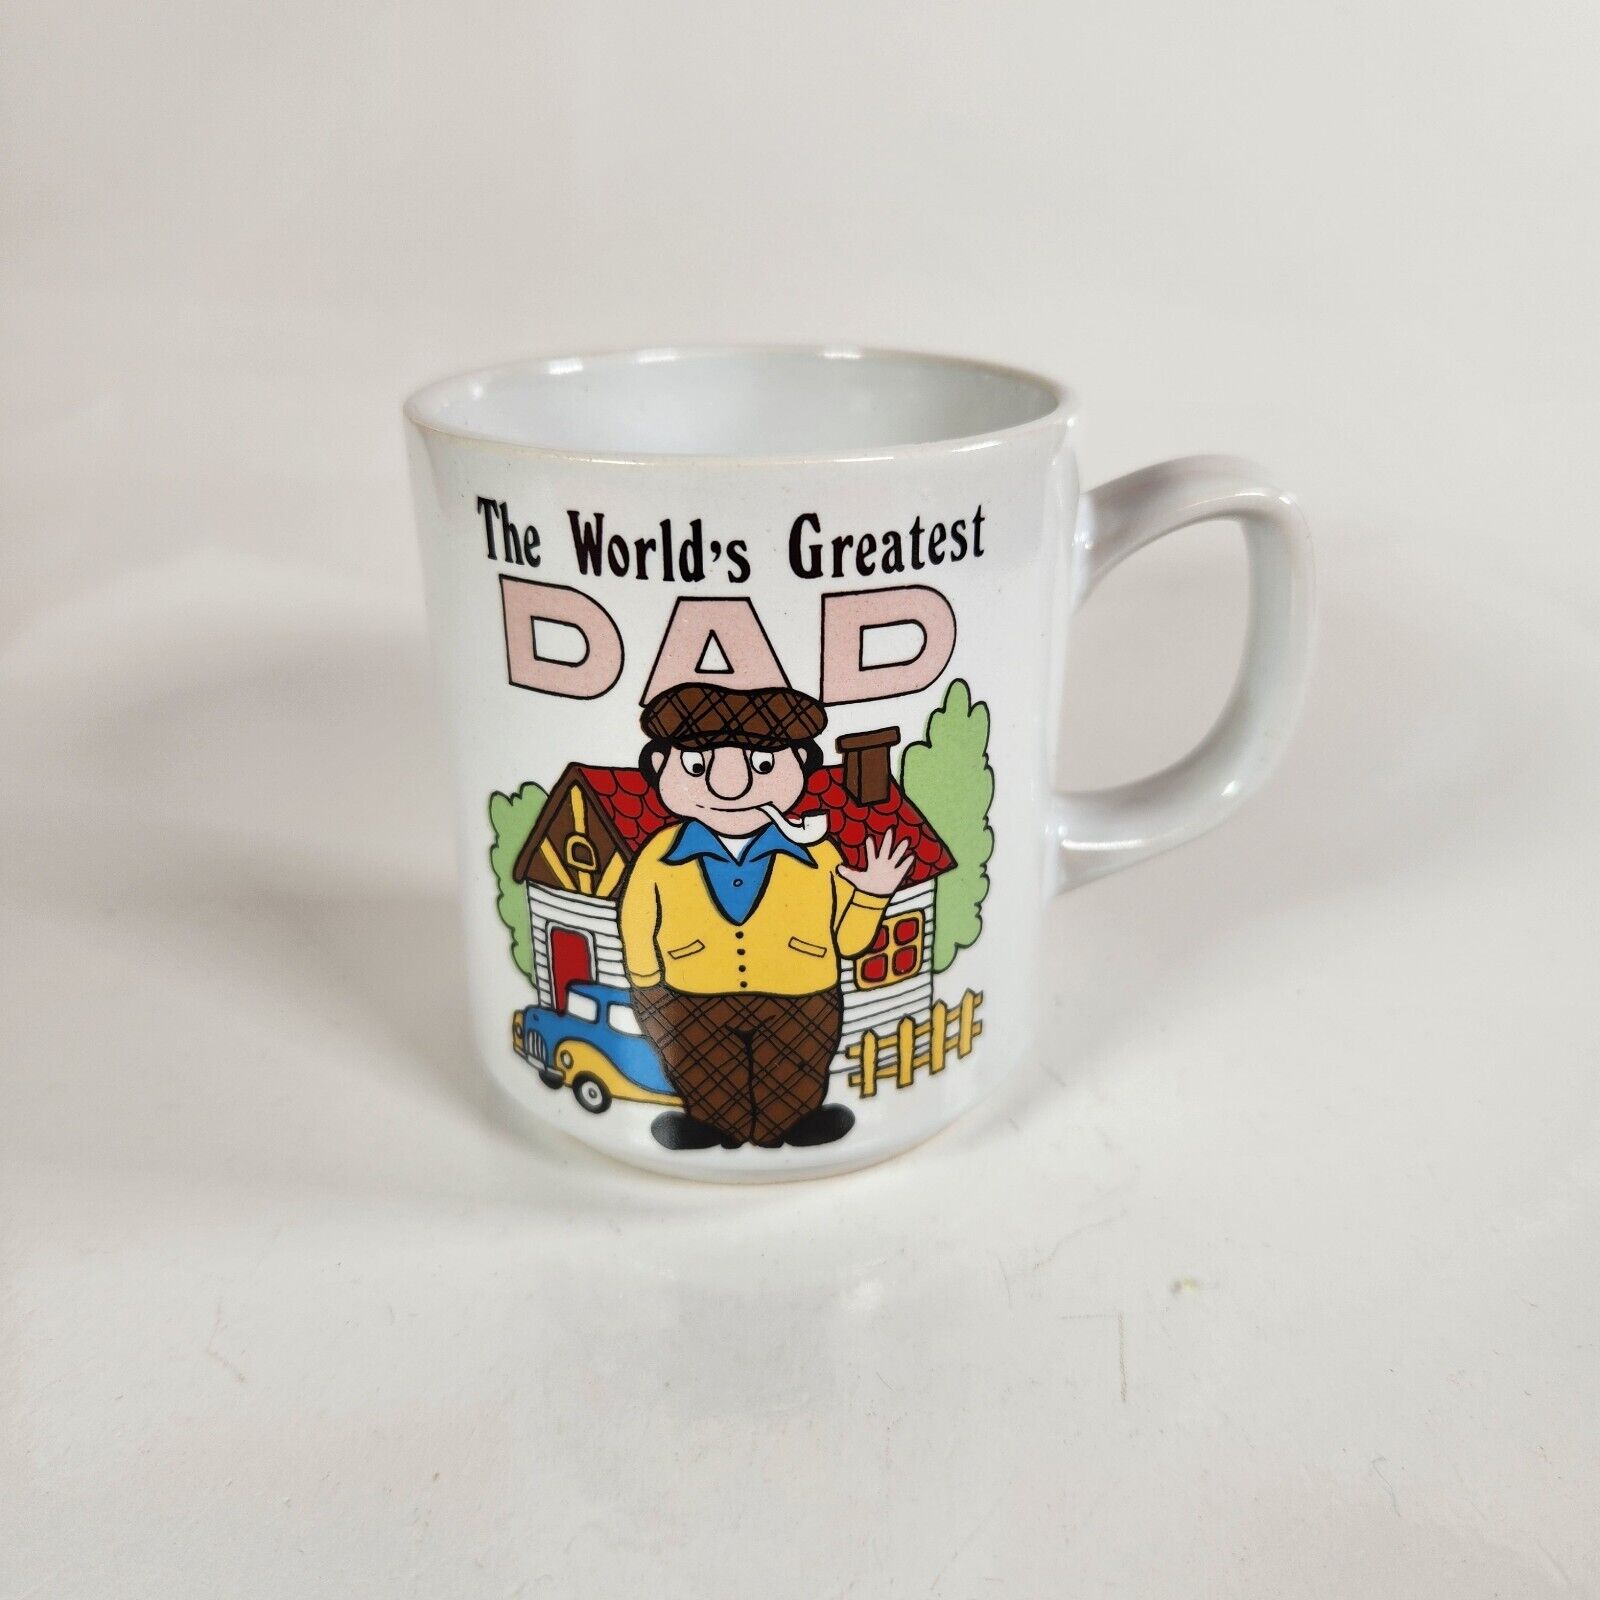 Vintage The Worlds Greatest Dad Coffee Tea Mug Cup Made In Japan 